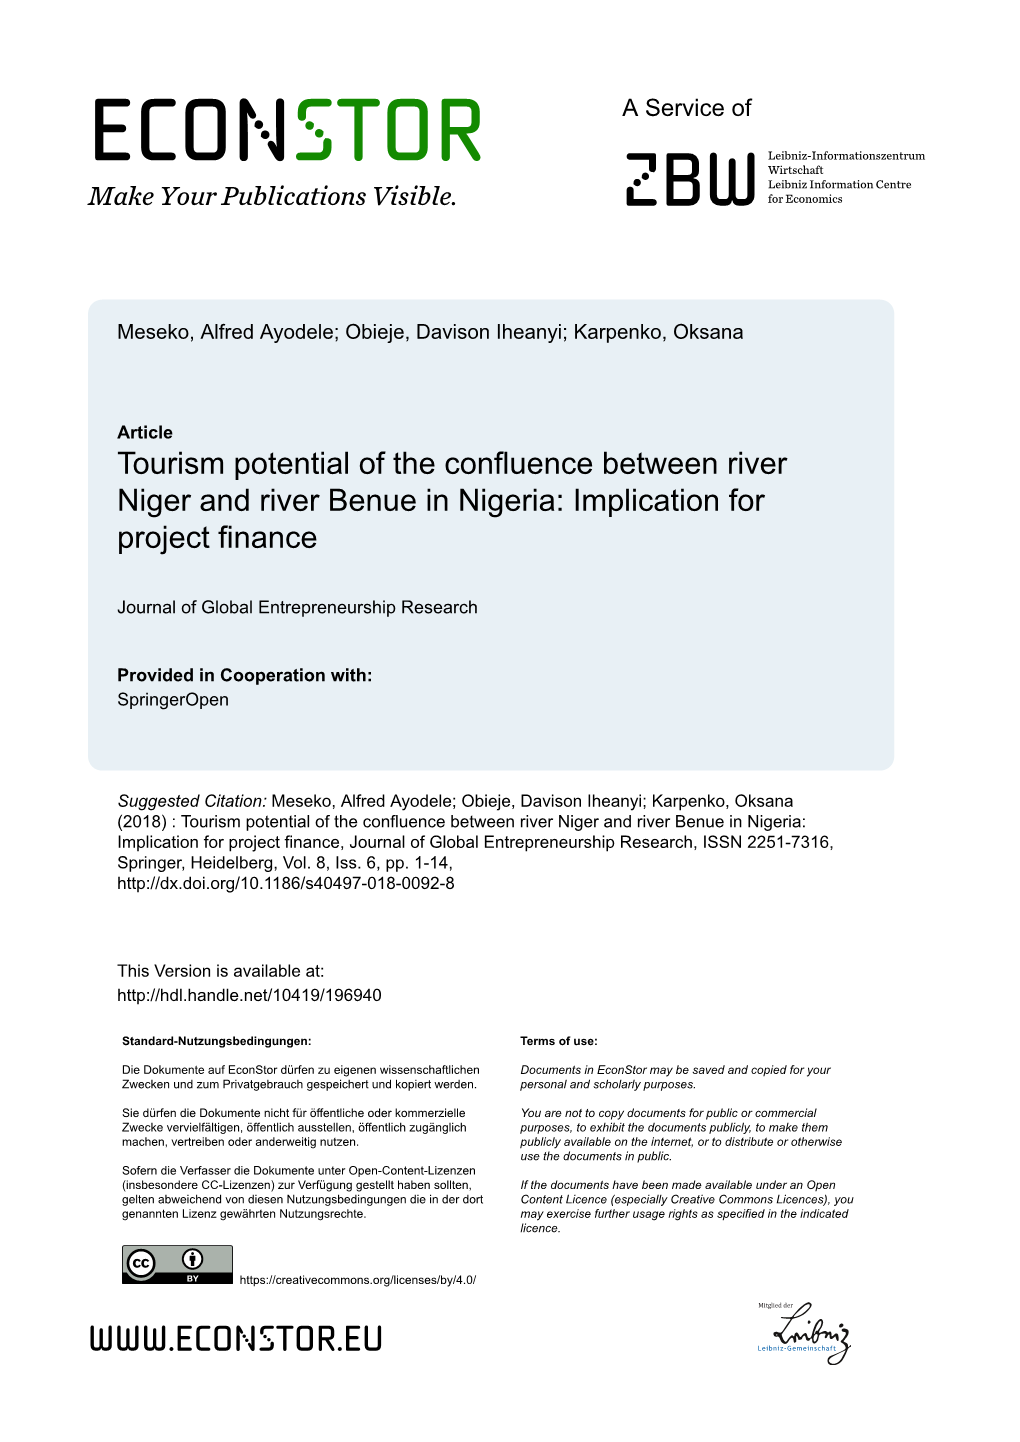 Tourism Potential of the Confluence Between River Niger and River Benue in Nigeria: Implication for Project Finance